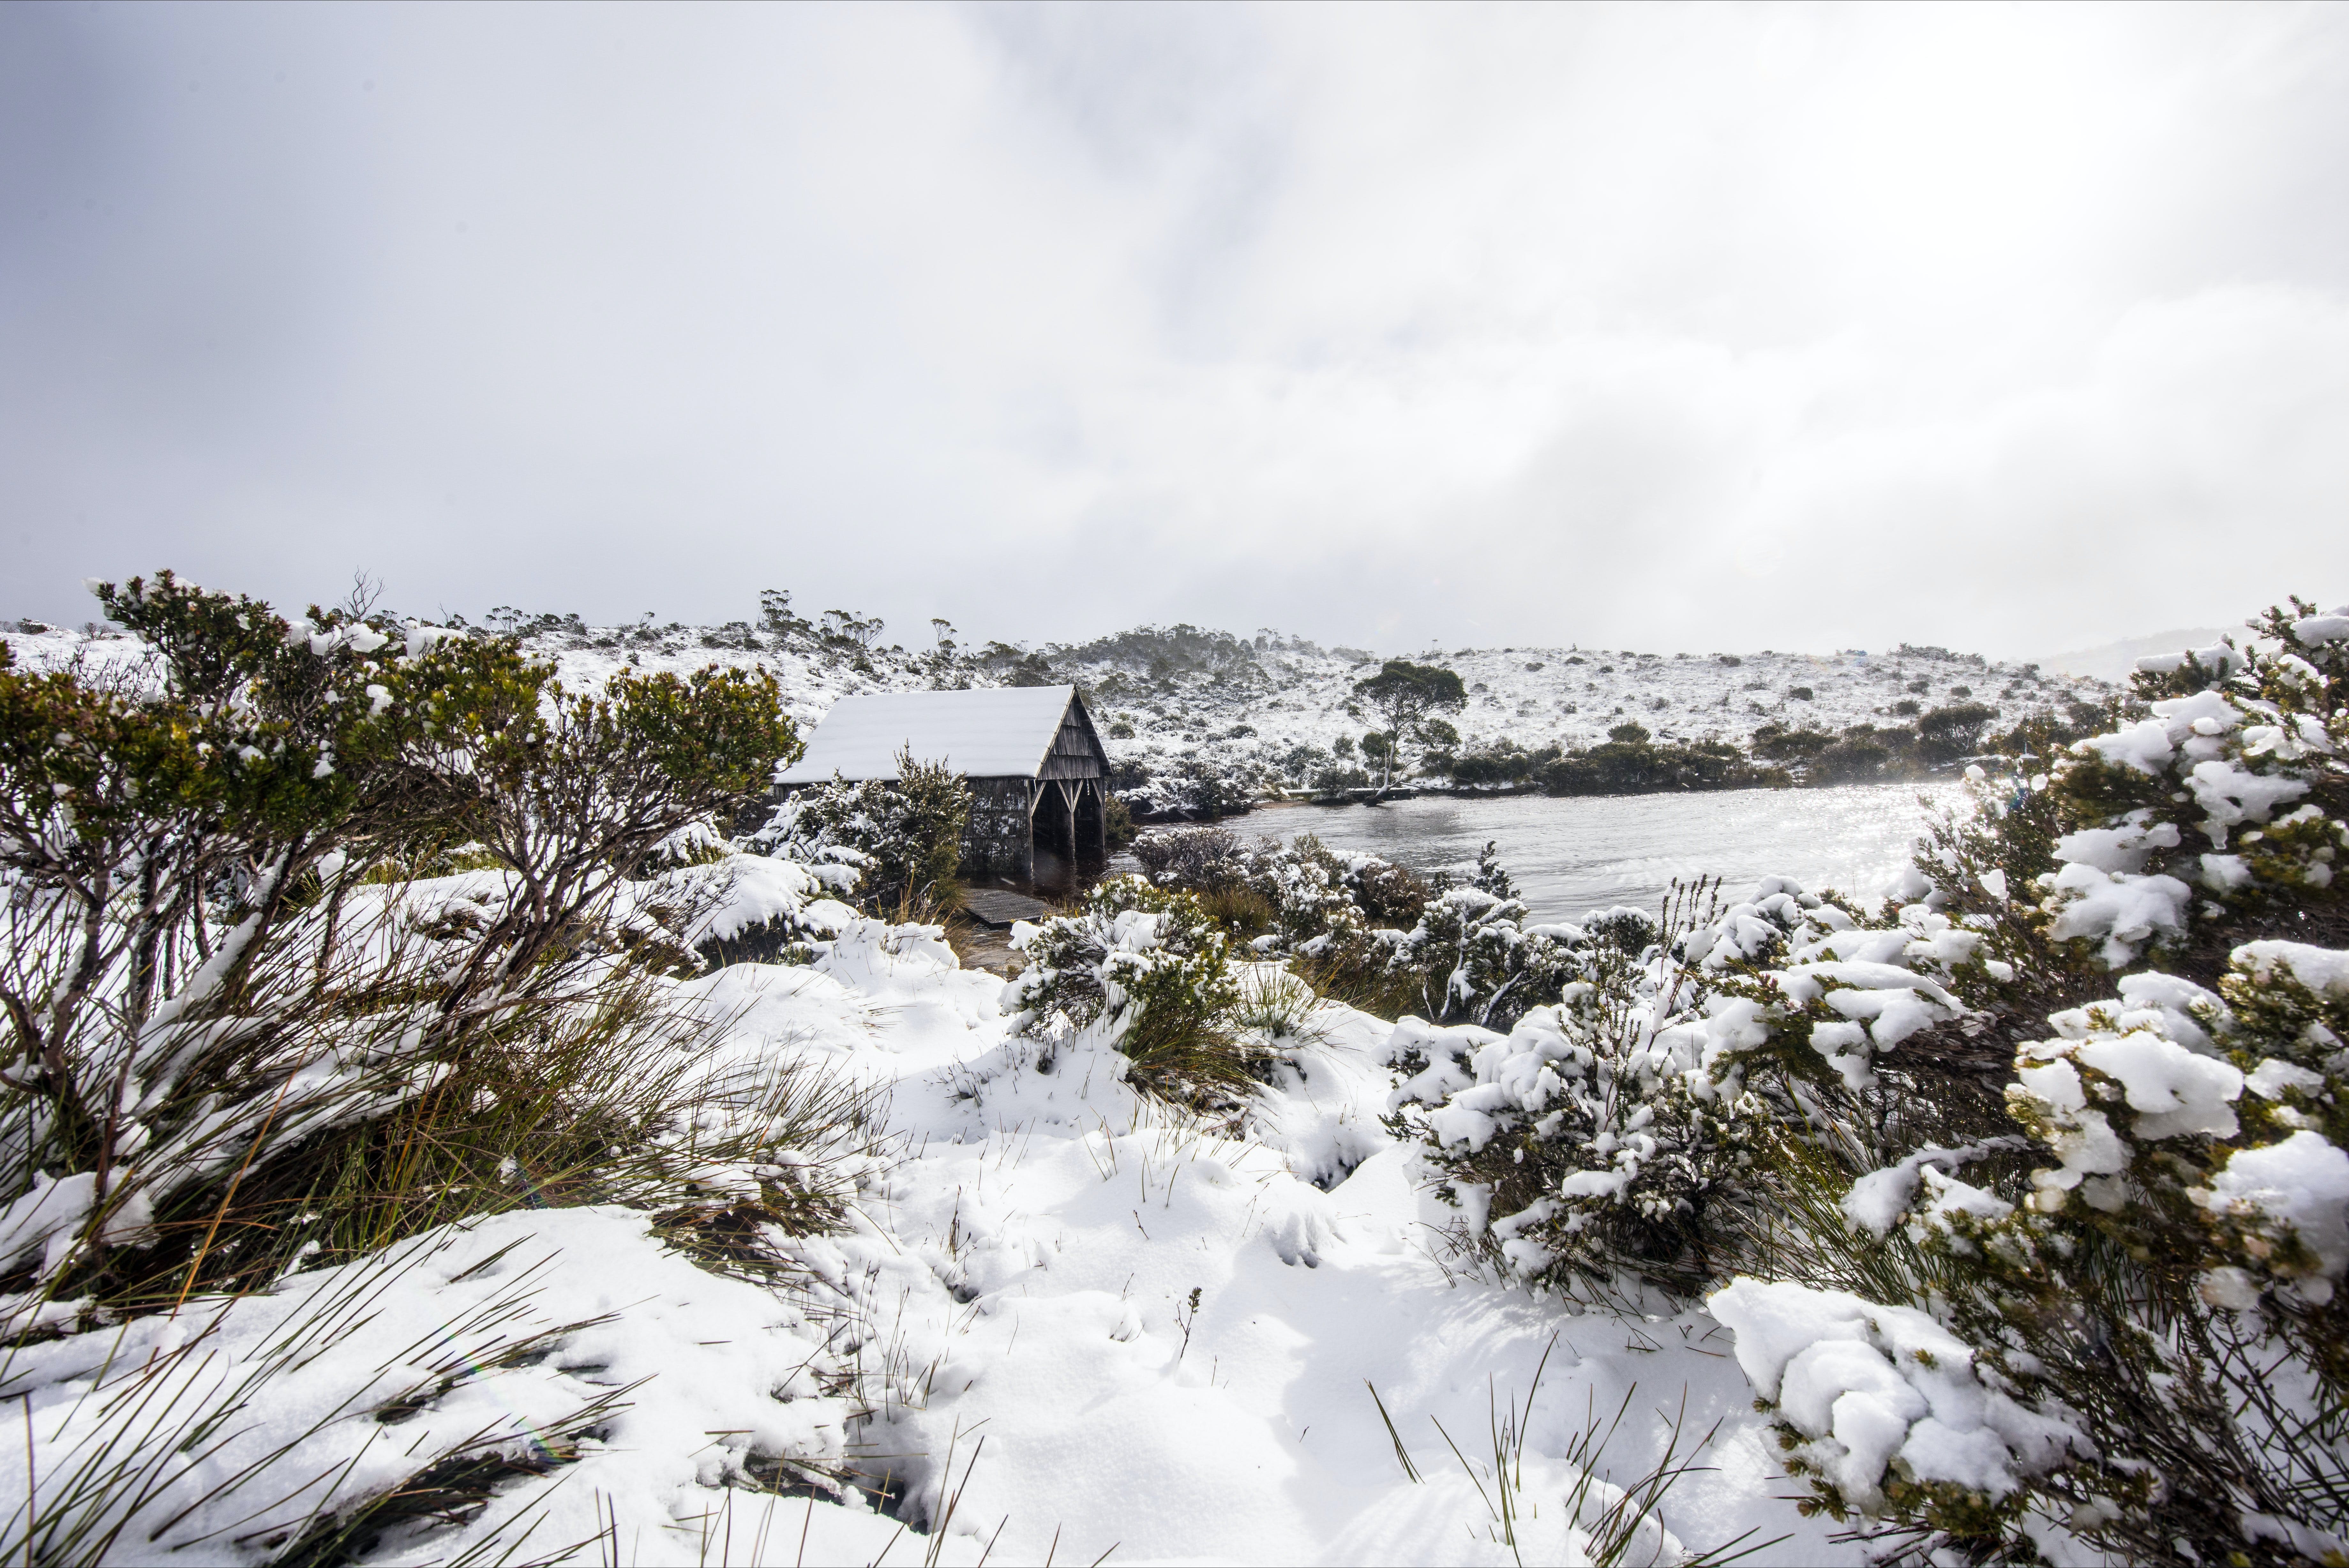 Christmas in July at Cradle Mountain Hotel 2020 - Pubs Sydney